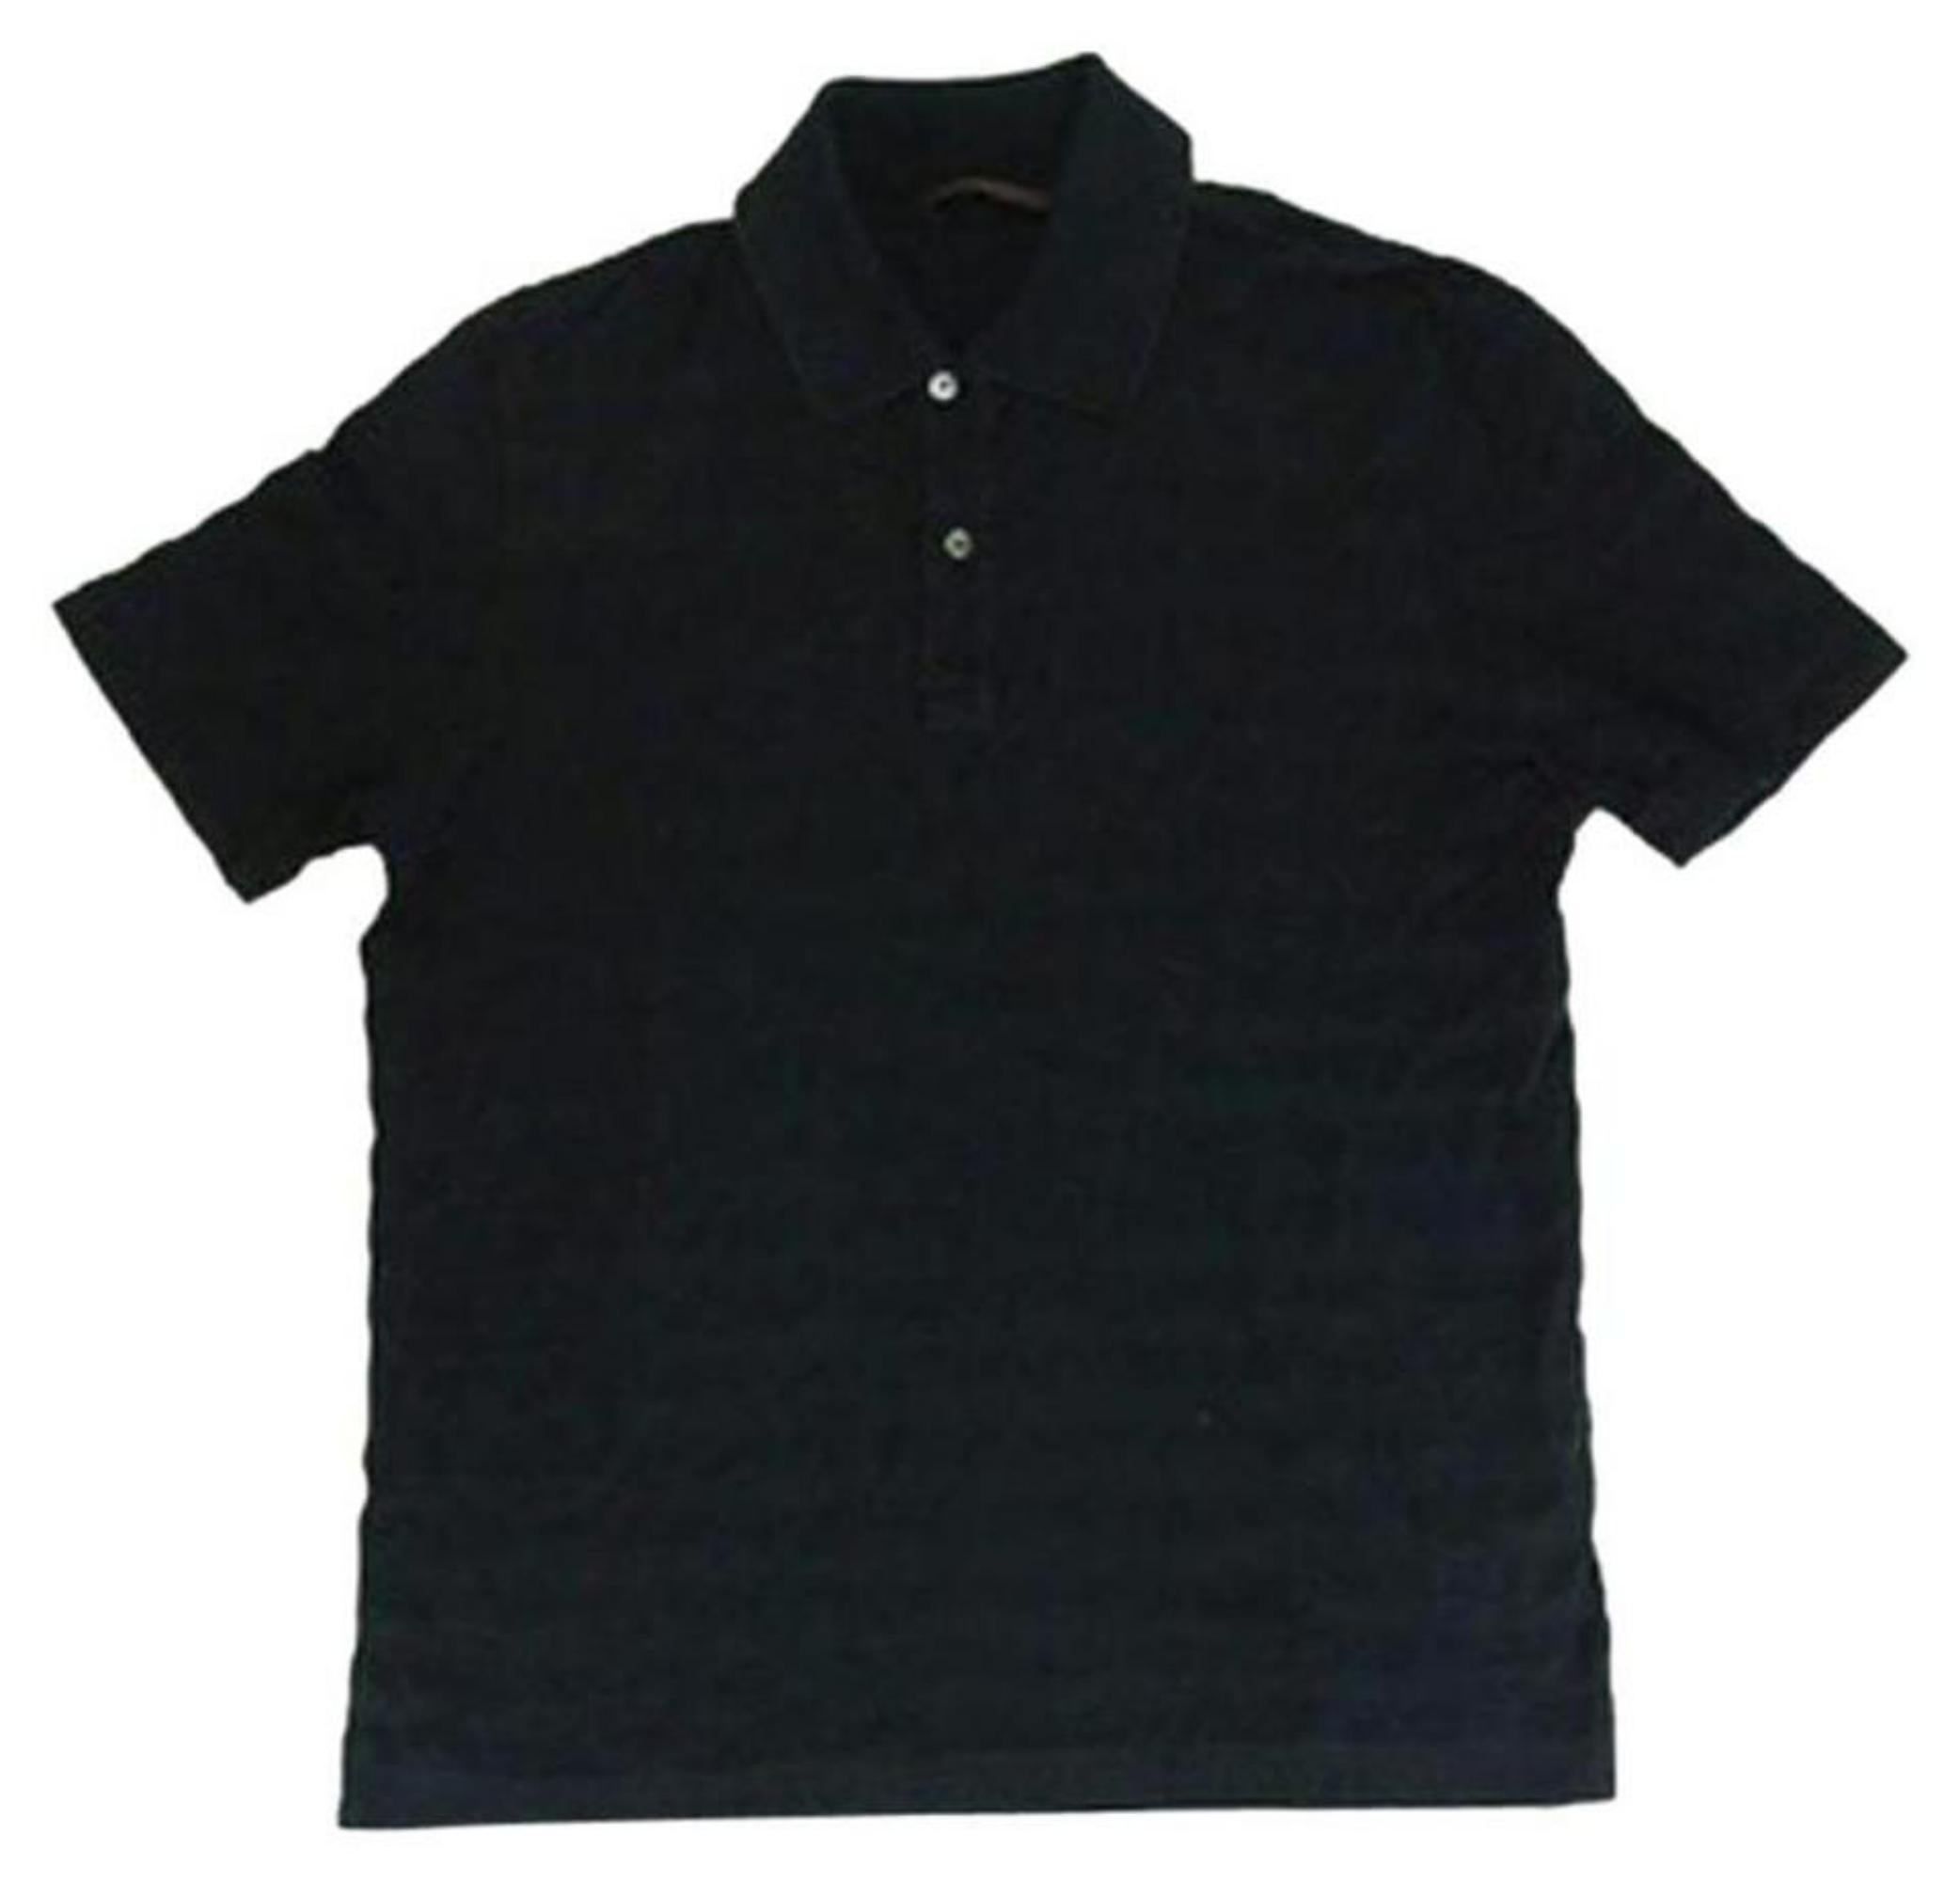 Louis Vuitton Black Men's Polo Logo Medium 164853 Lvtl187 Down Tee Shirt In Fair Condition For Sale In Forest Hills, NY